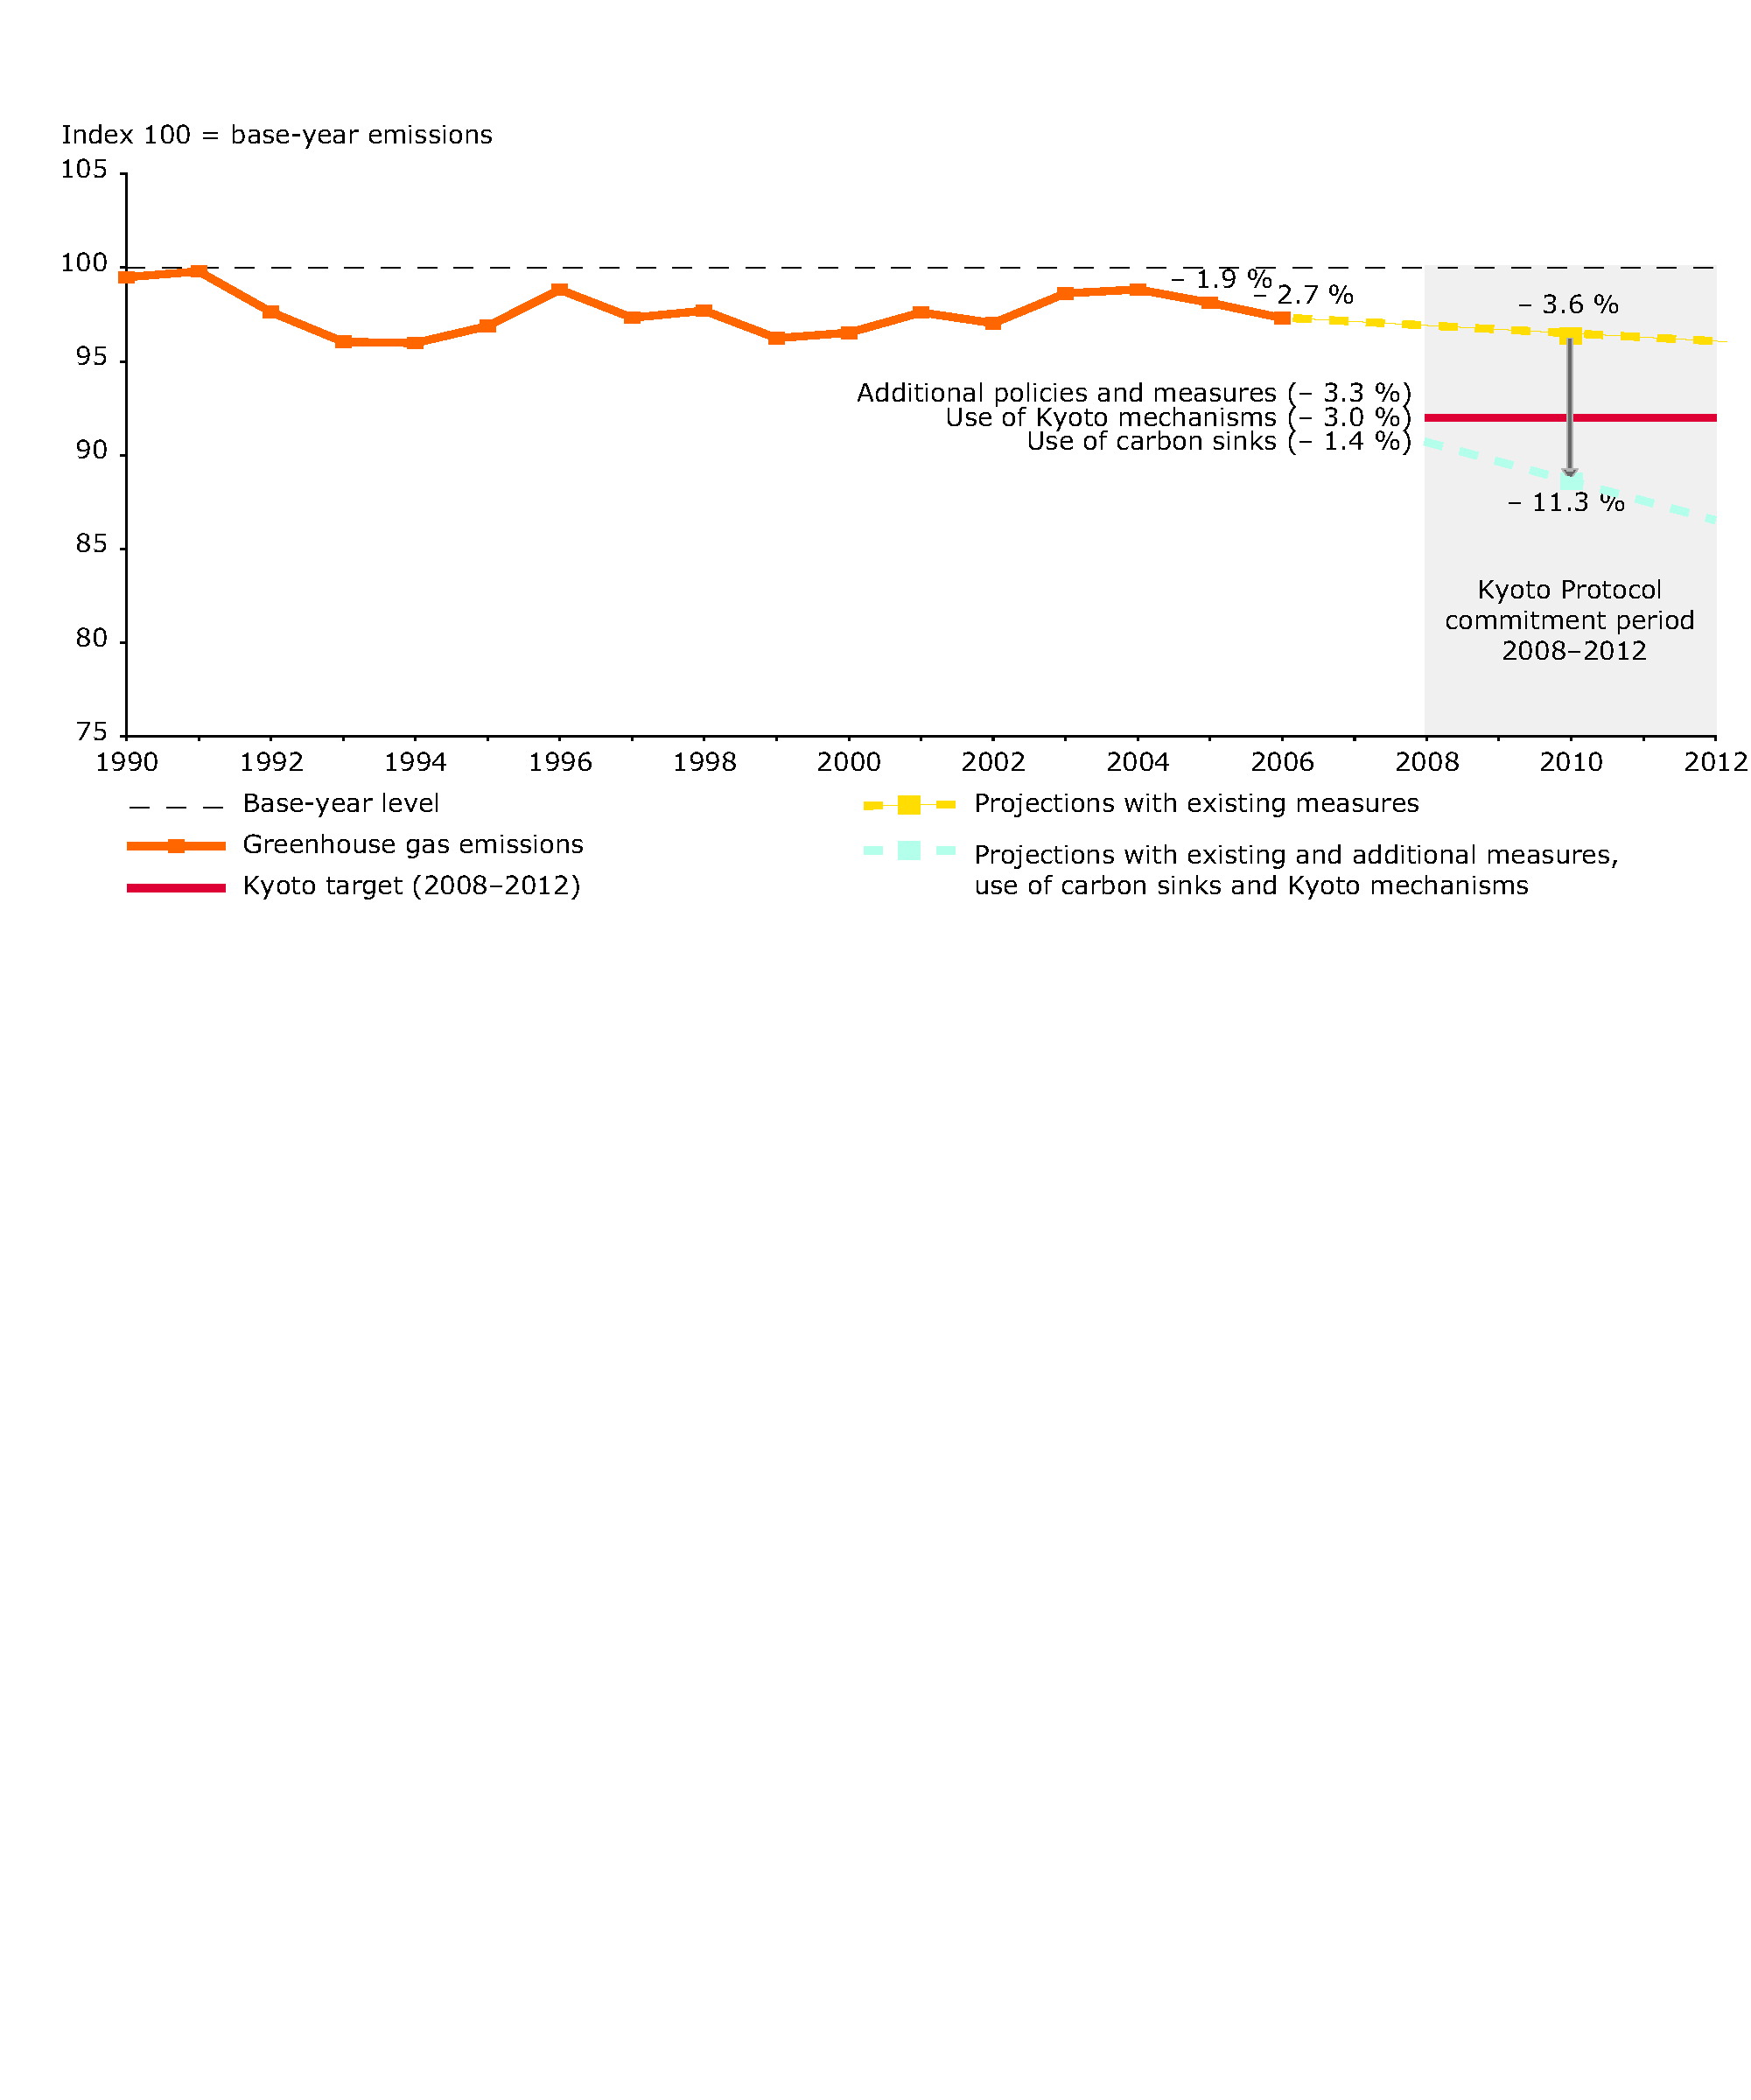 Past and projected EU-15 greenhouse gas emissions compared with Kyoto target for 2008-2012